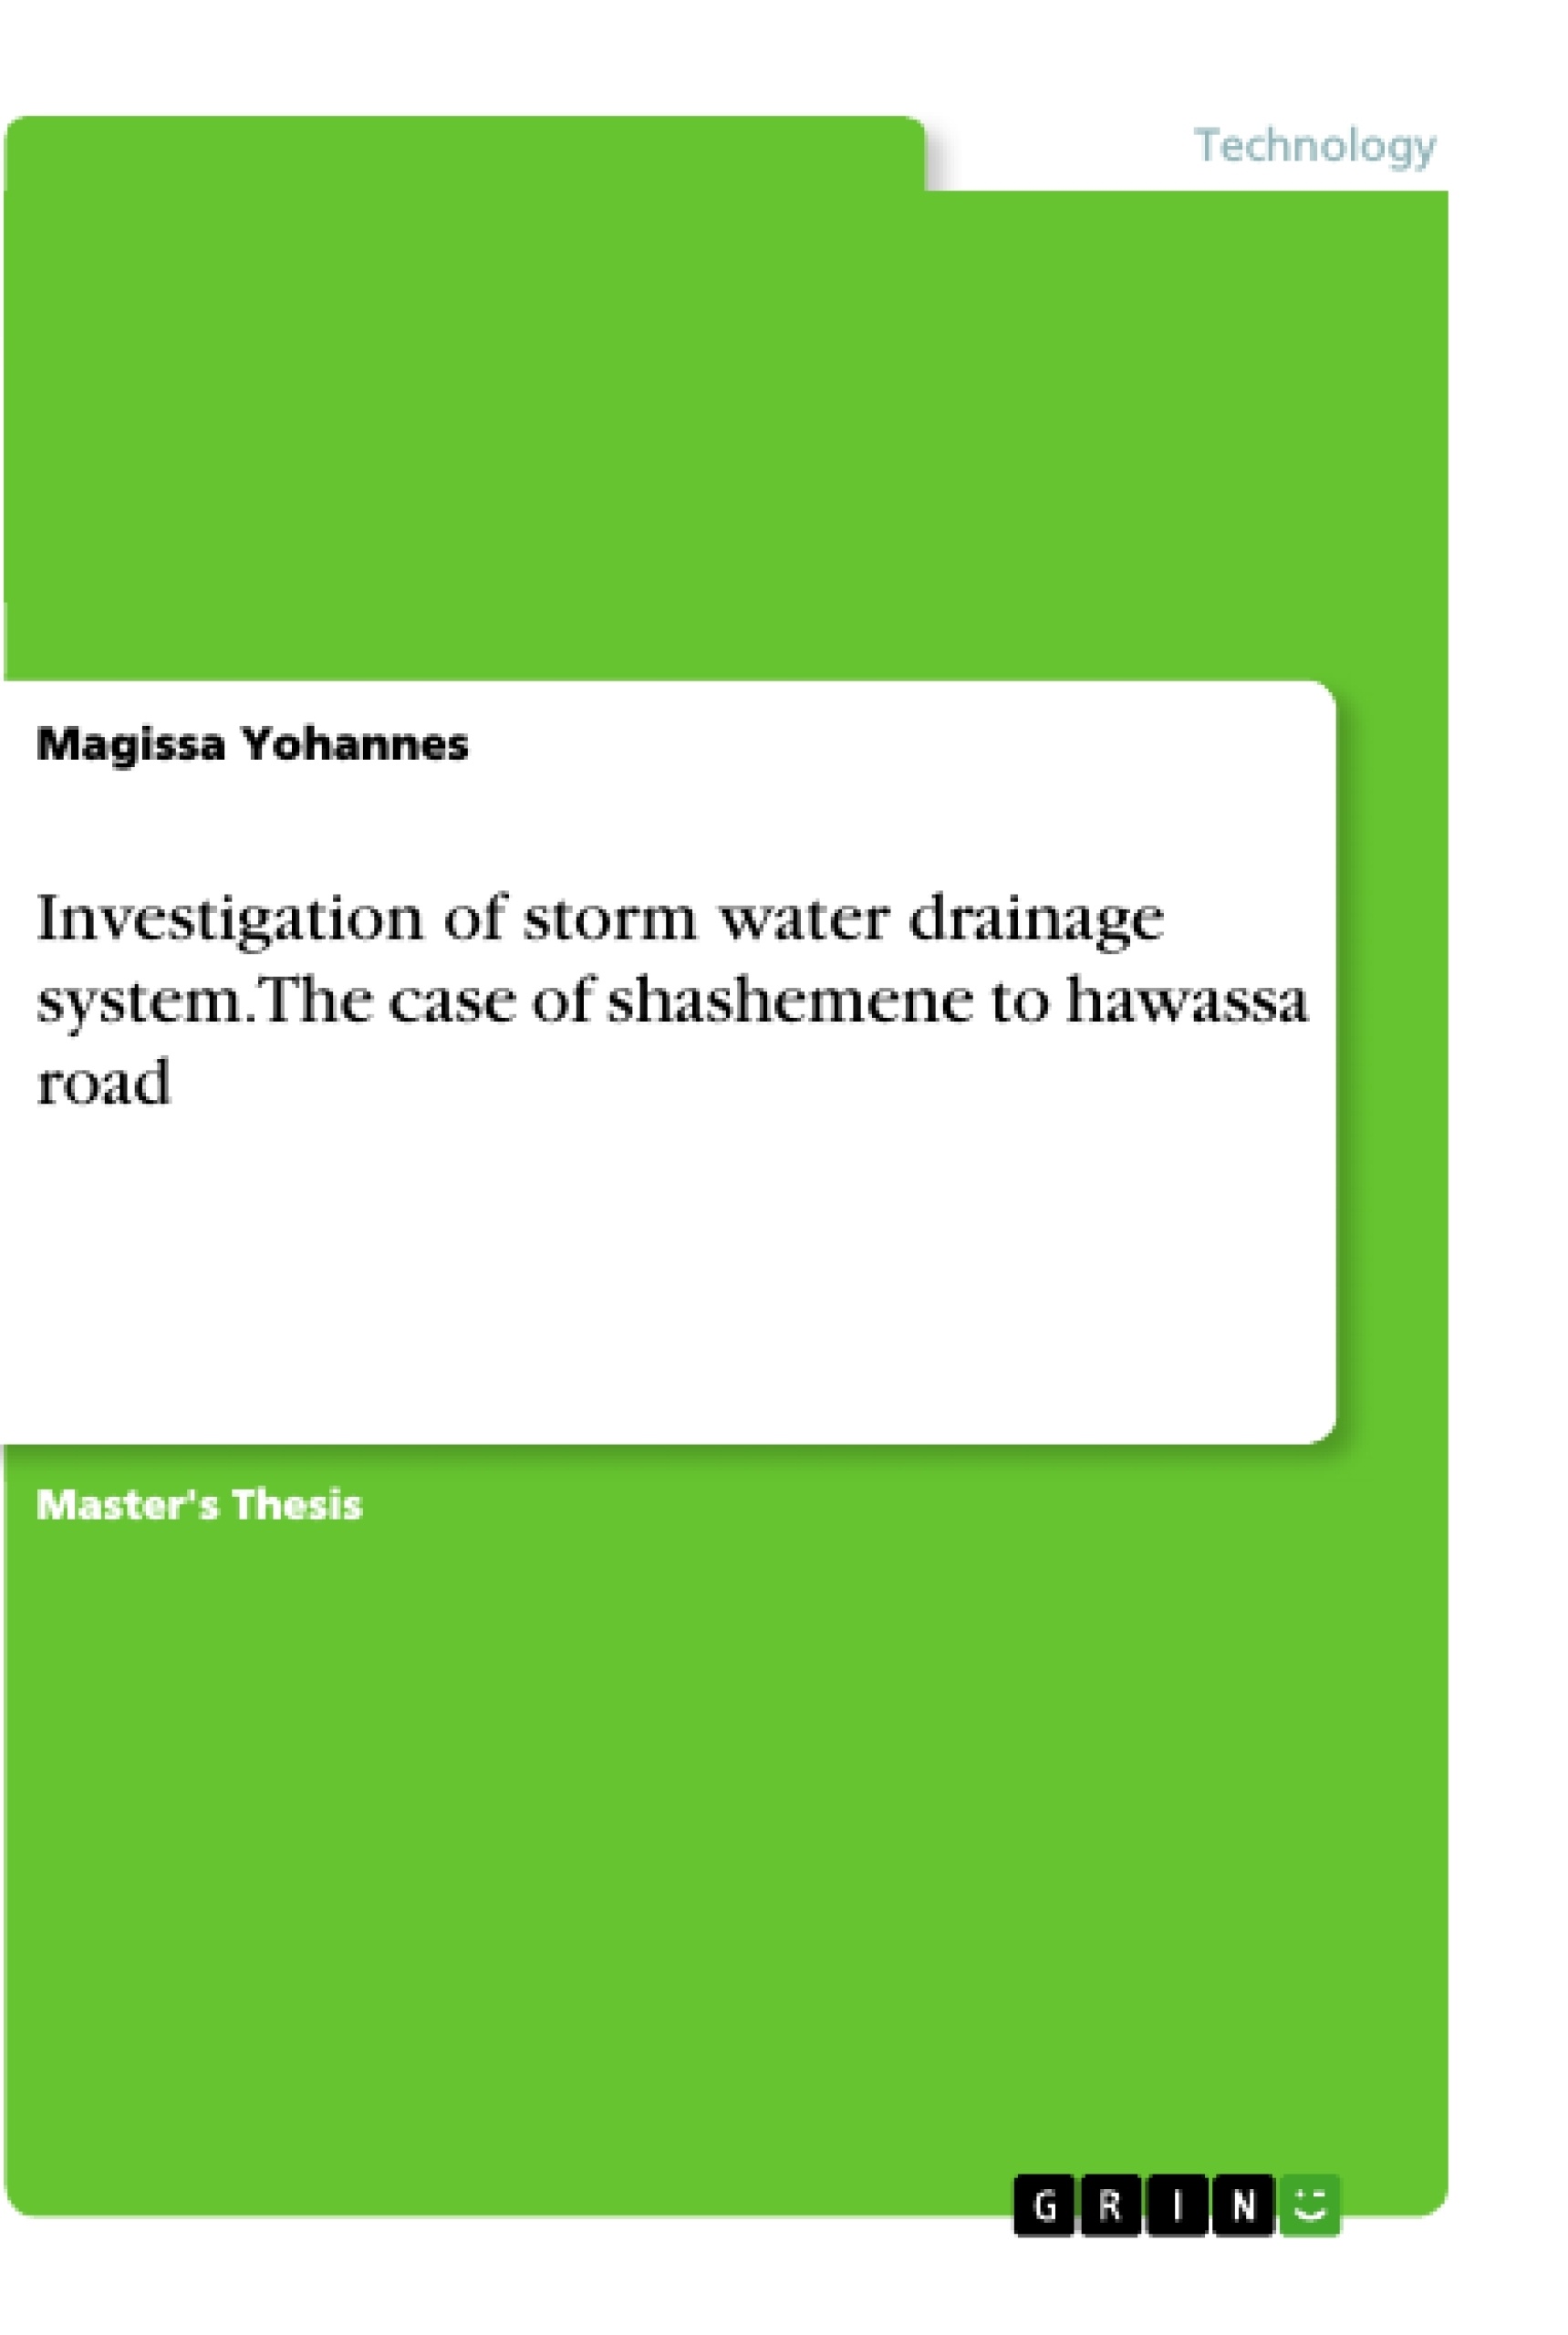 Title: Investigation of storm water drainage system. The case of shashemene to hawassa road